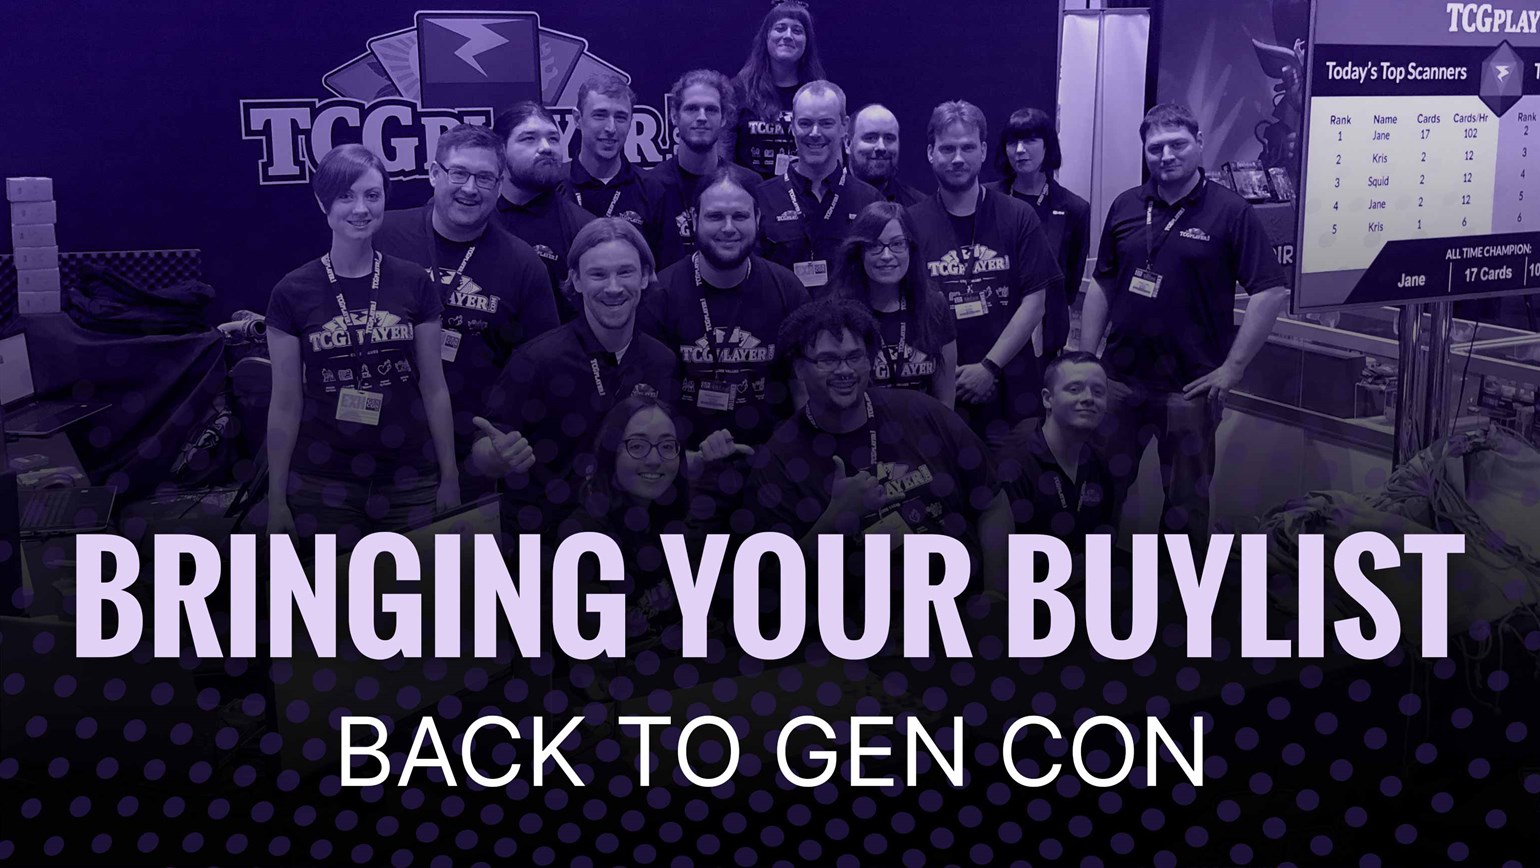 Get Ready: We’re Taking Your Buylist to Gen Con